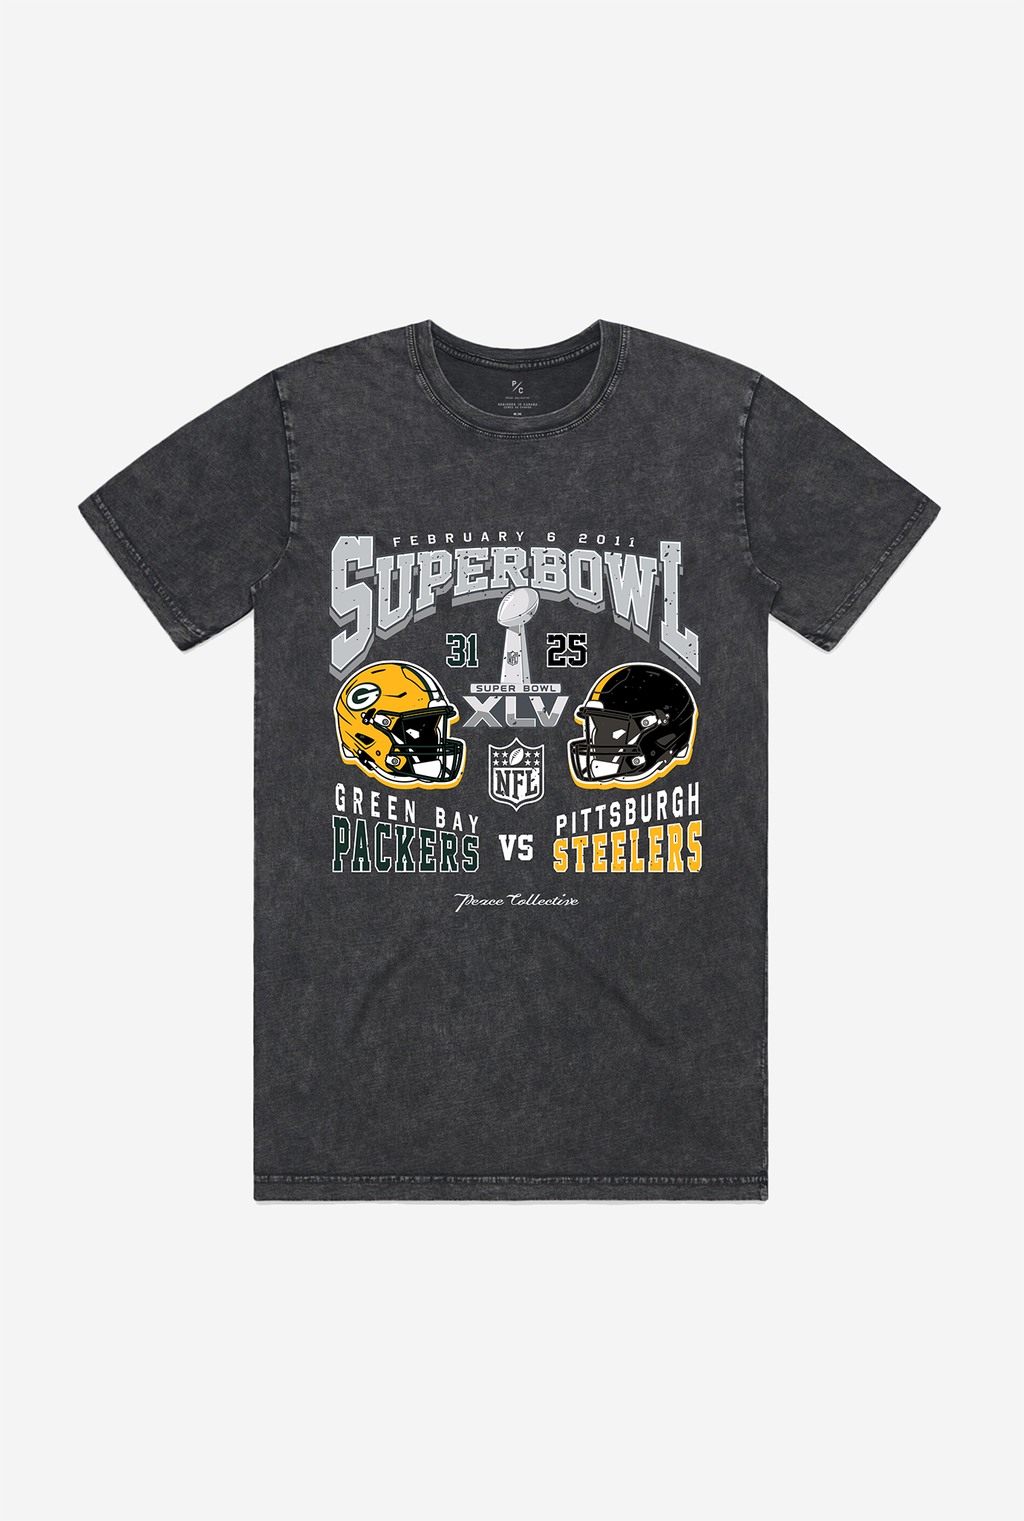 Super Bowl XLV: Green Bay Packers vs Pittsburgh Steelers Stonewashed T